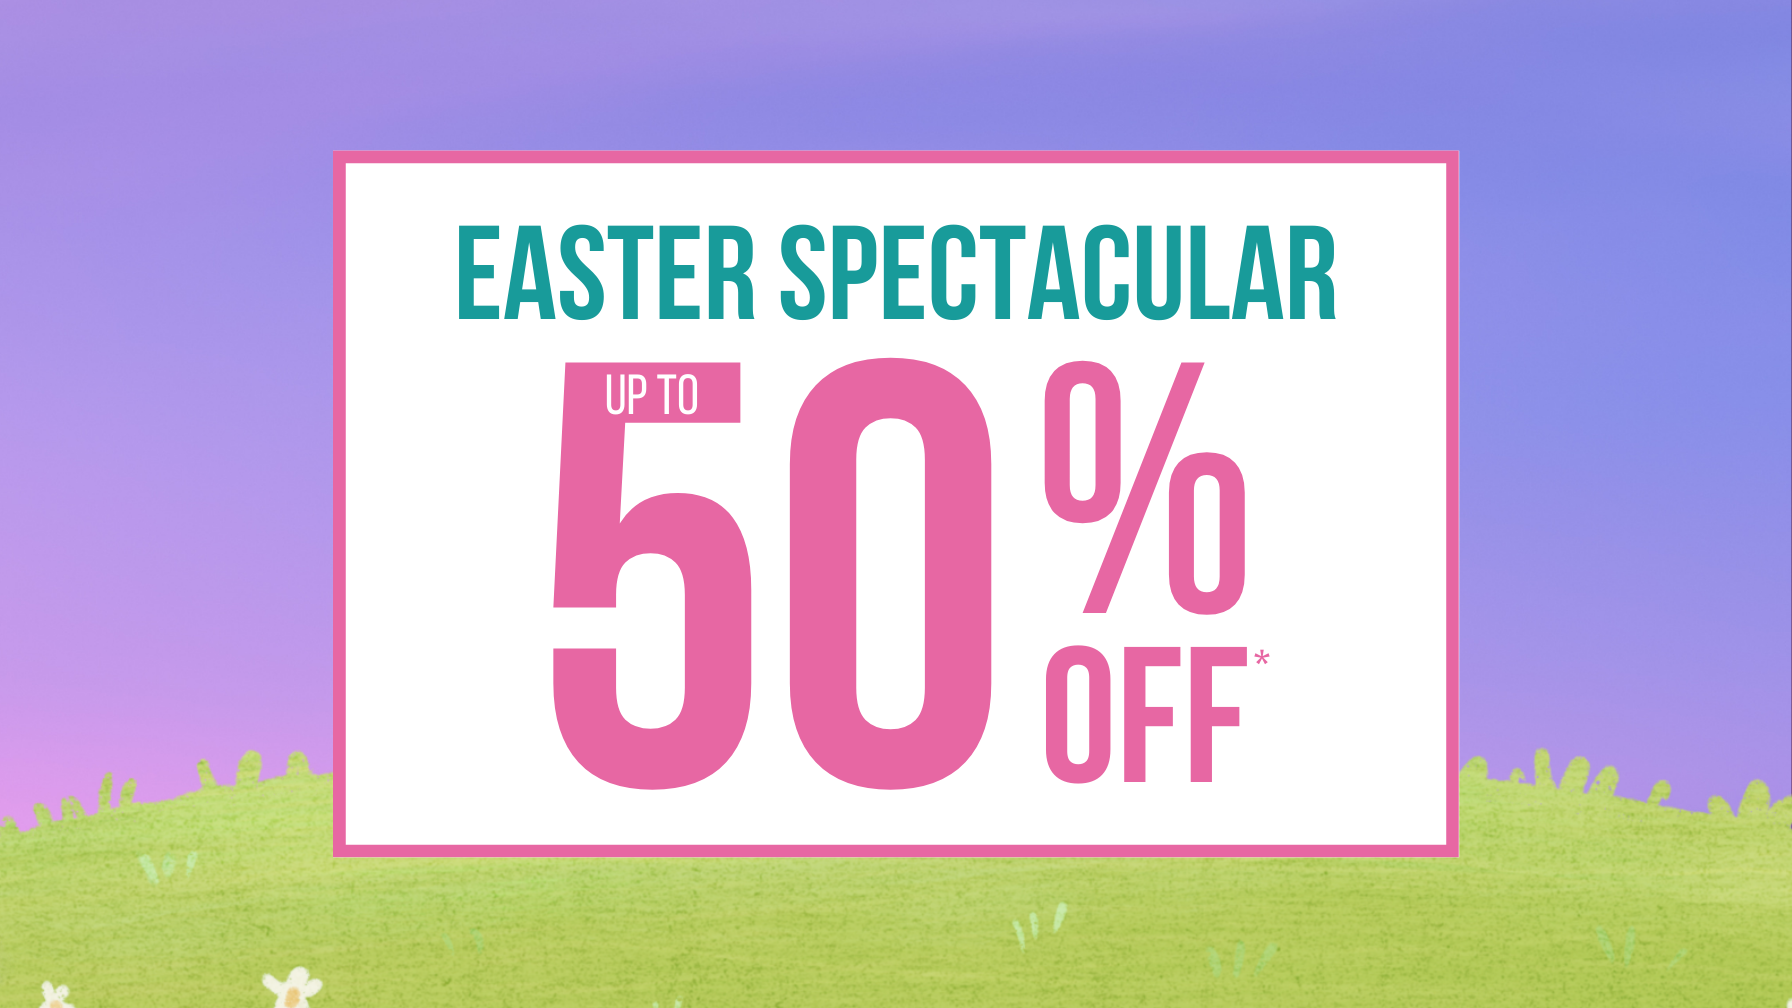 Easter Spectacular is NOW ON!